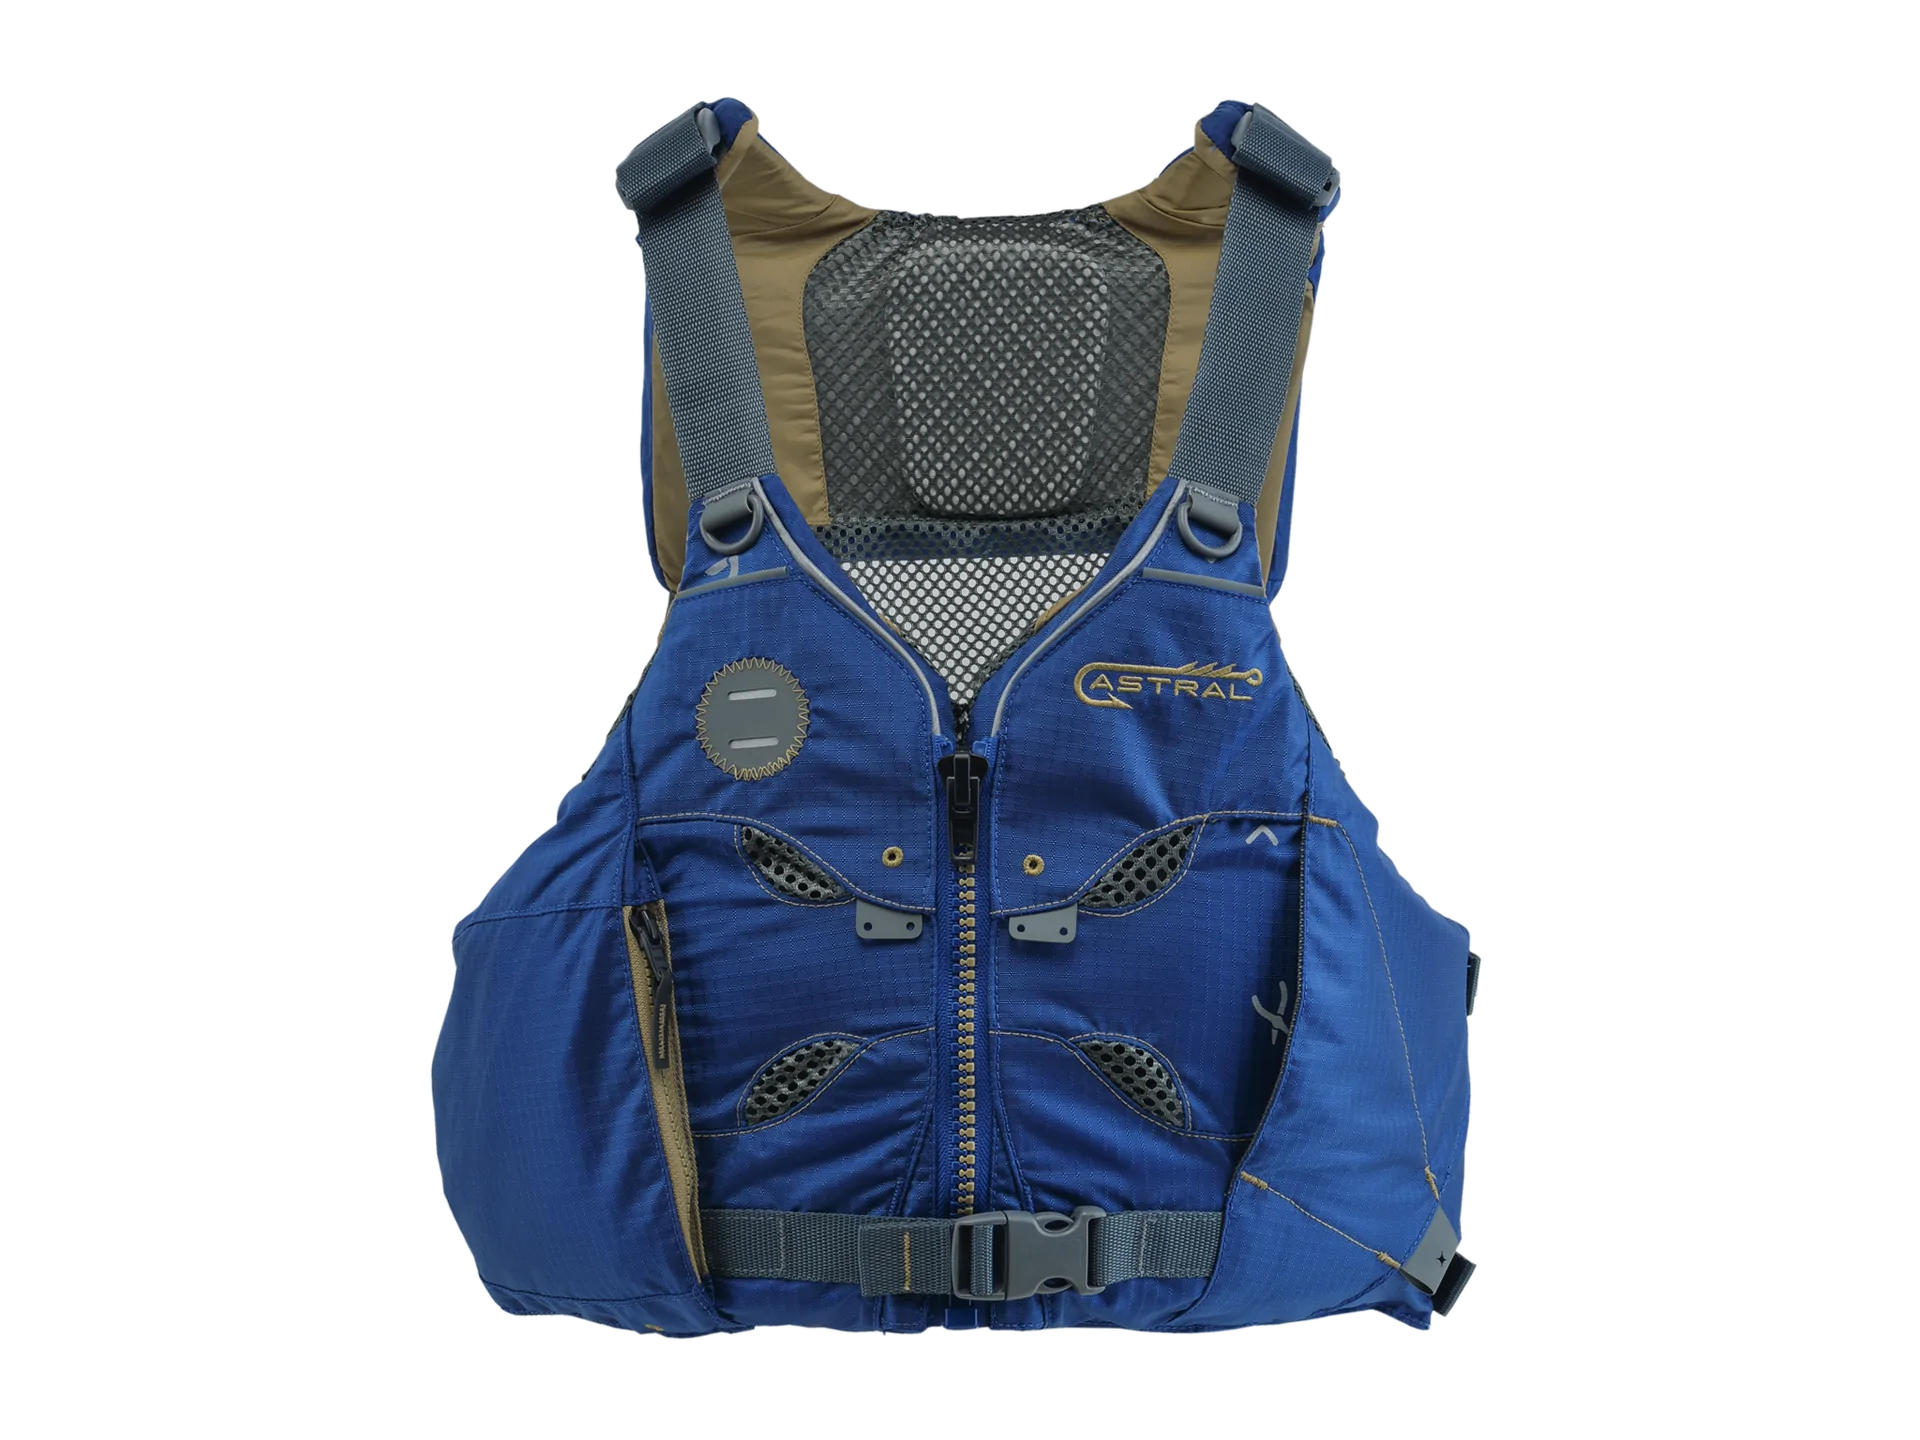 Featuring the V-Eight Fisher PFD fishing pfd, men's pfd, women's pfd manufactured by Astral shown here from a fourth angle.